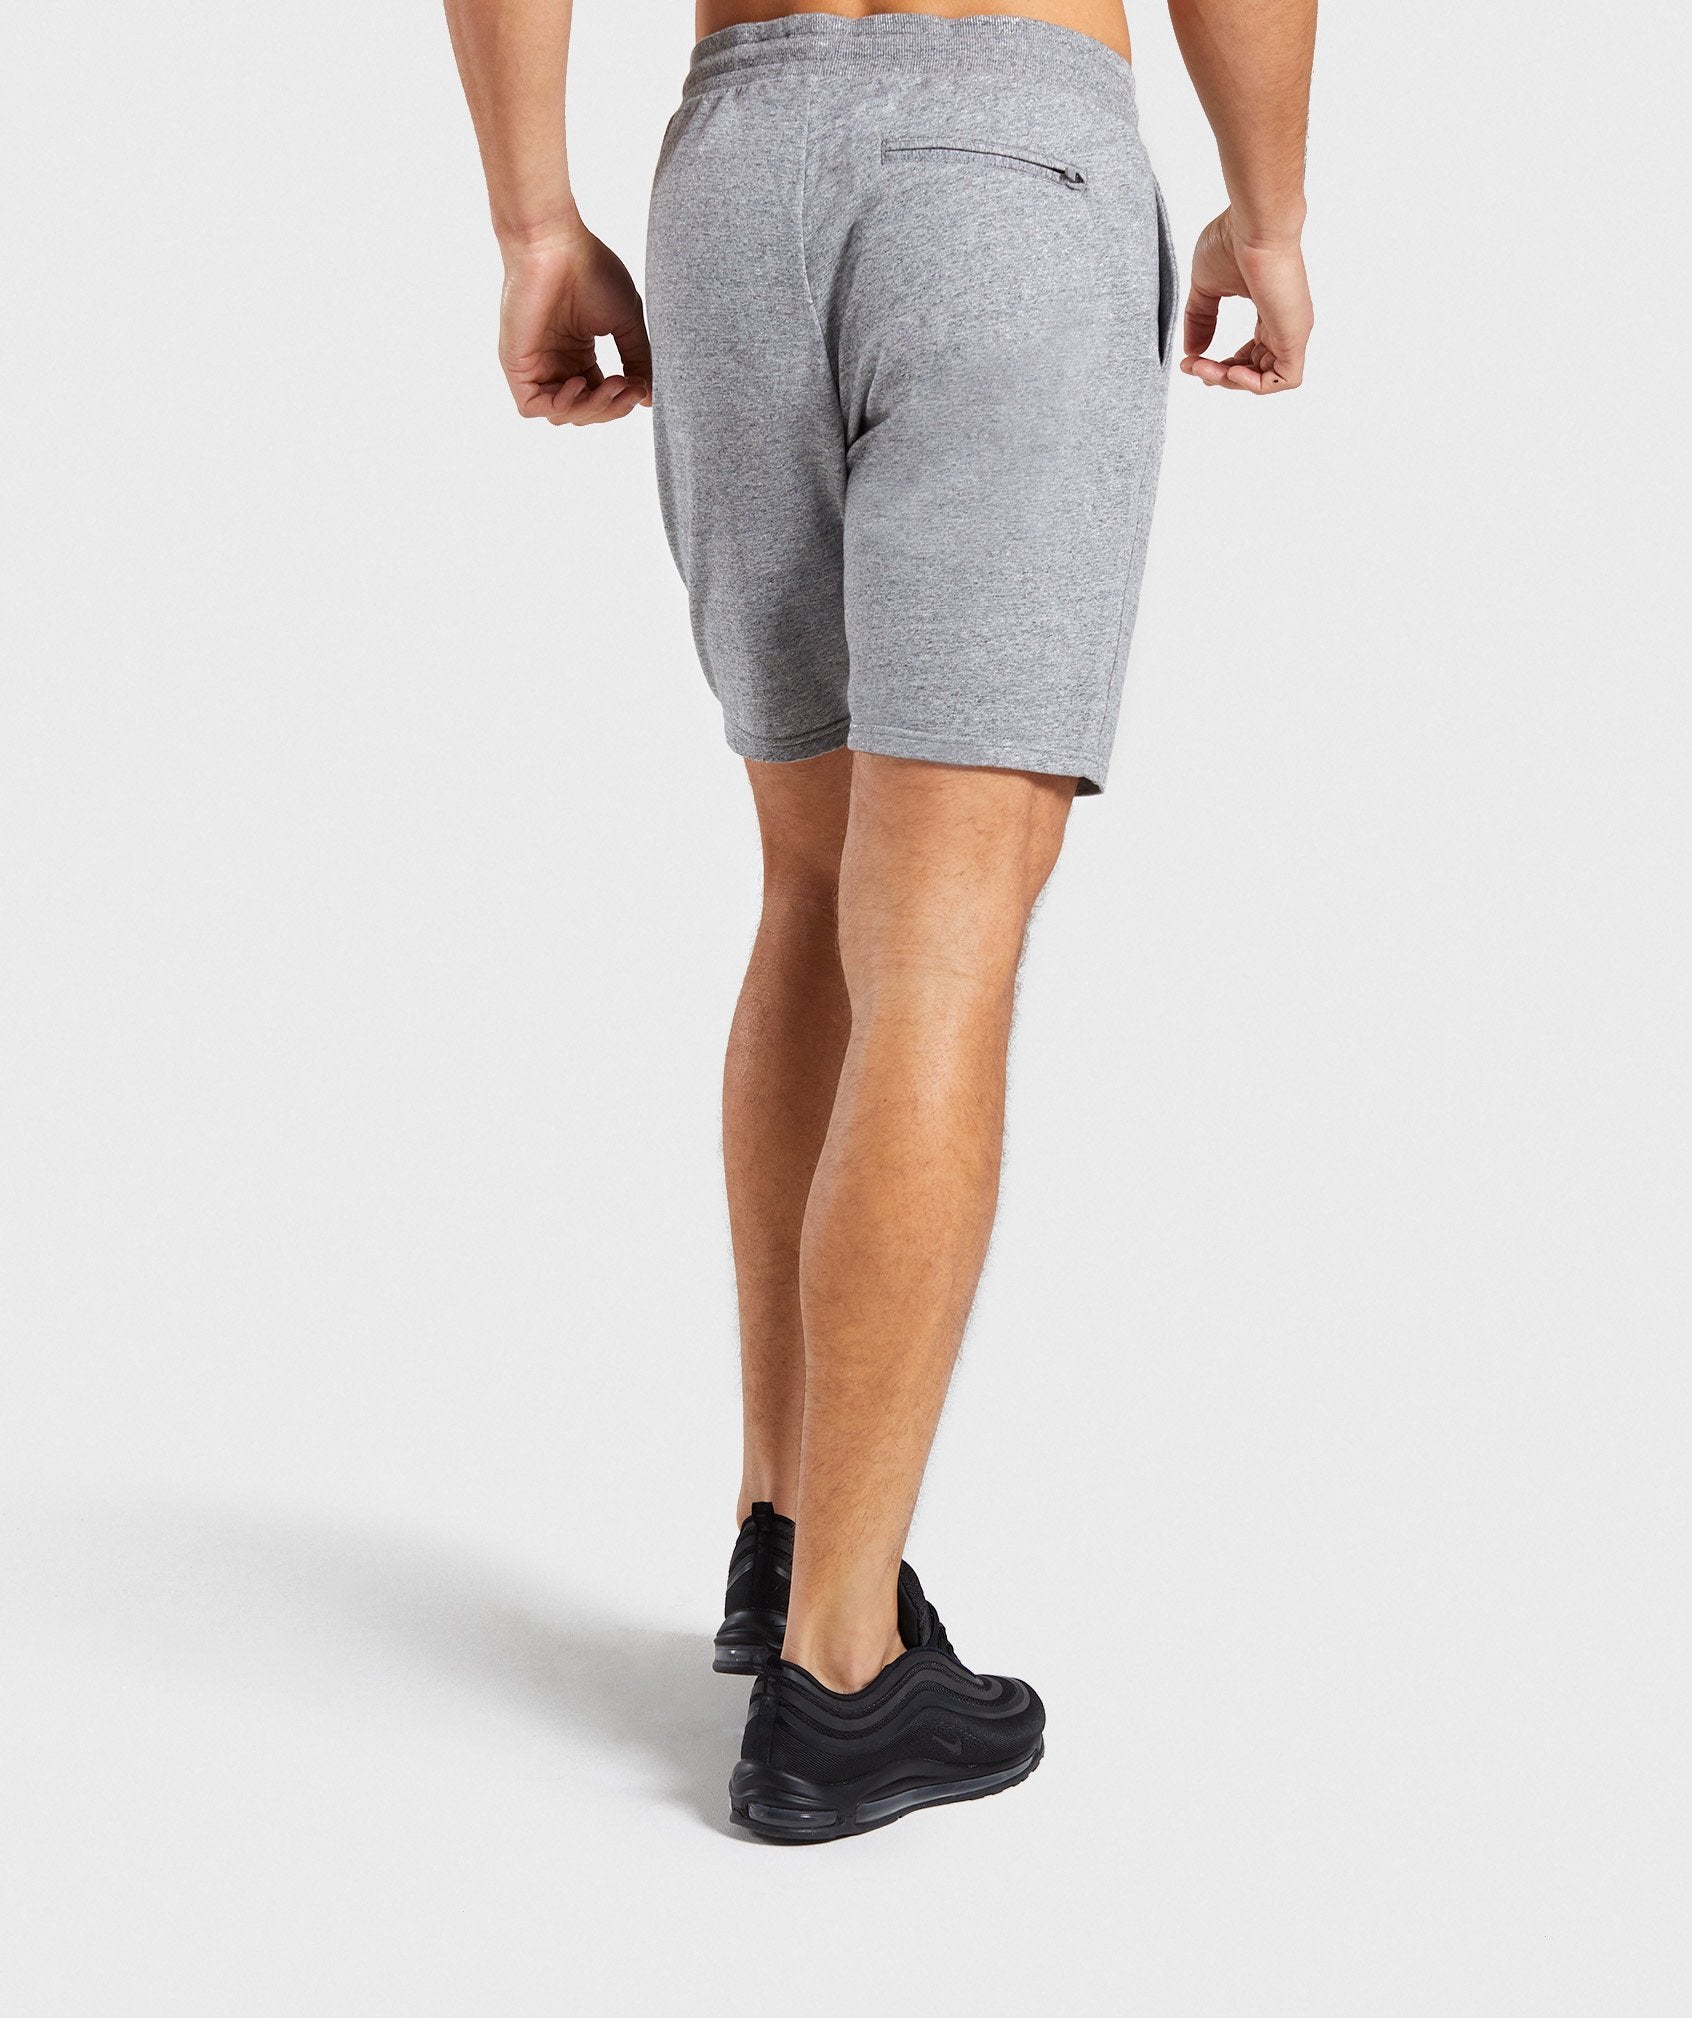 Lounge Shorts in Grey Marl - view 2